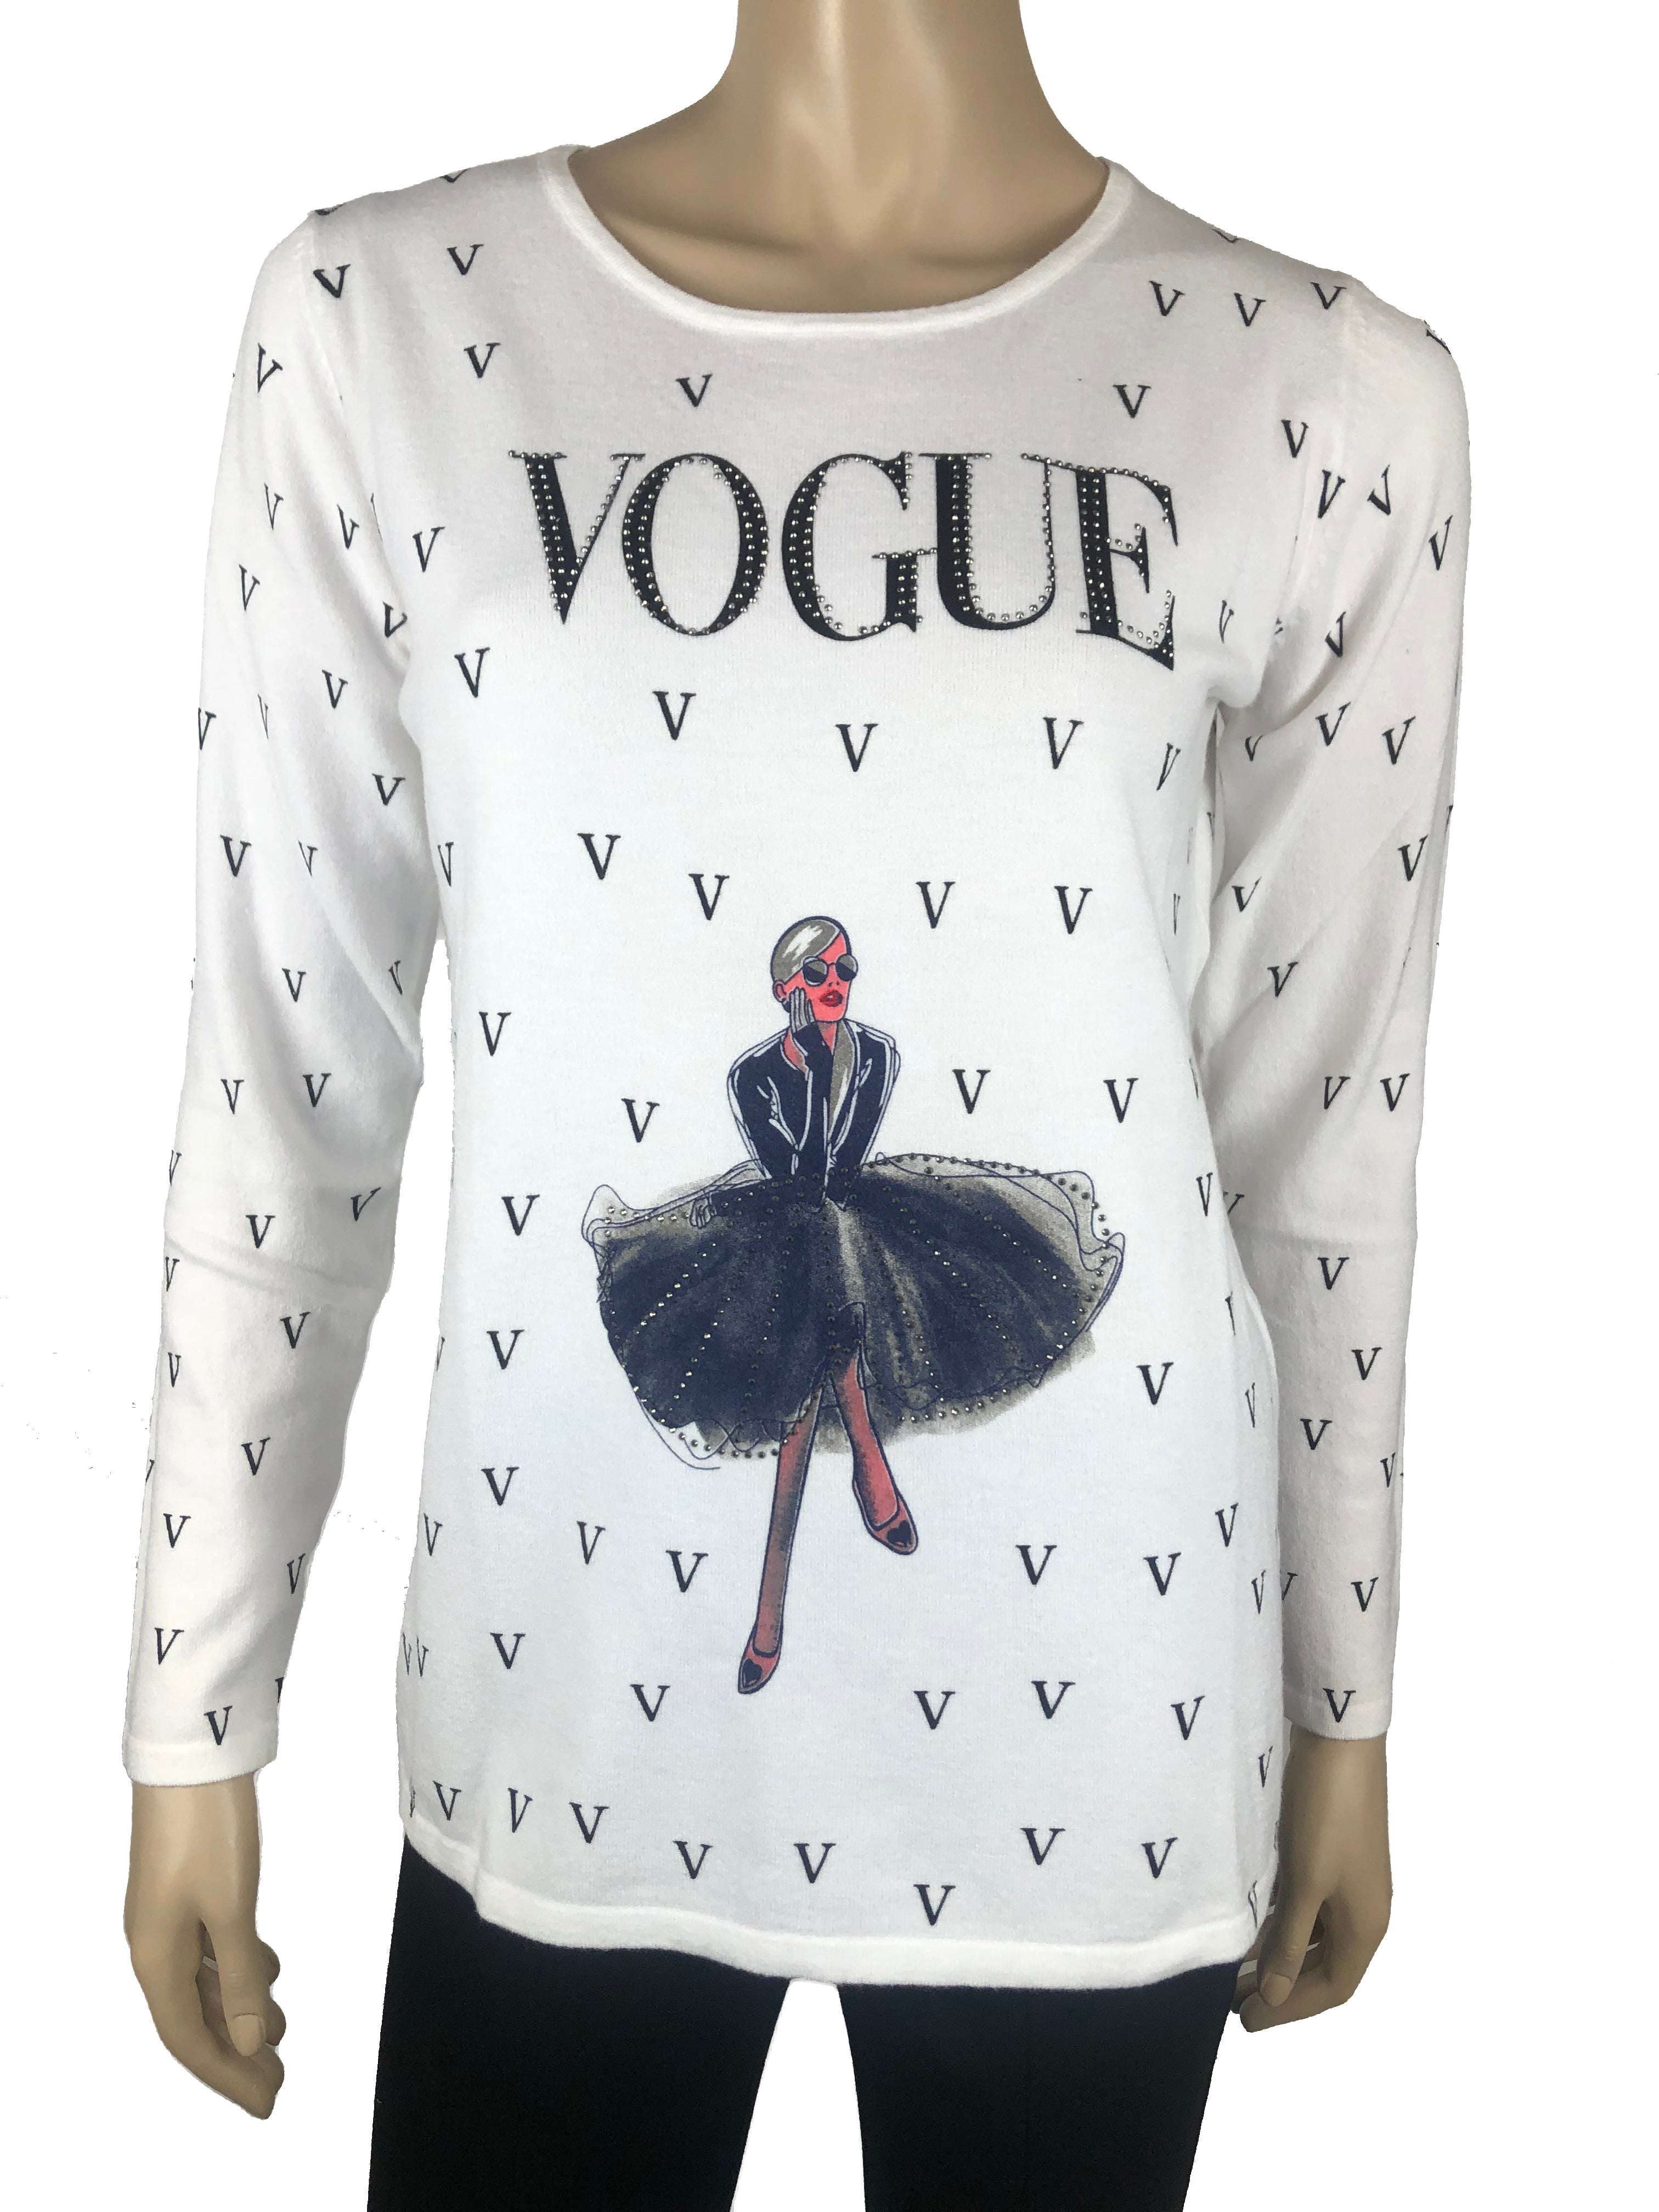 Sweater Fashion Vogue Collection Quality Design Comfort Fit Yvonne Marie Boutiques Canada - Yvonne Marie